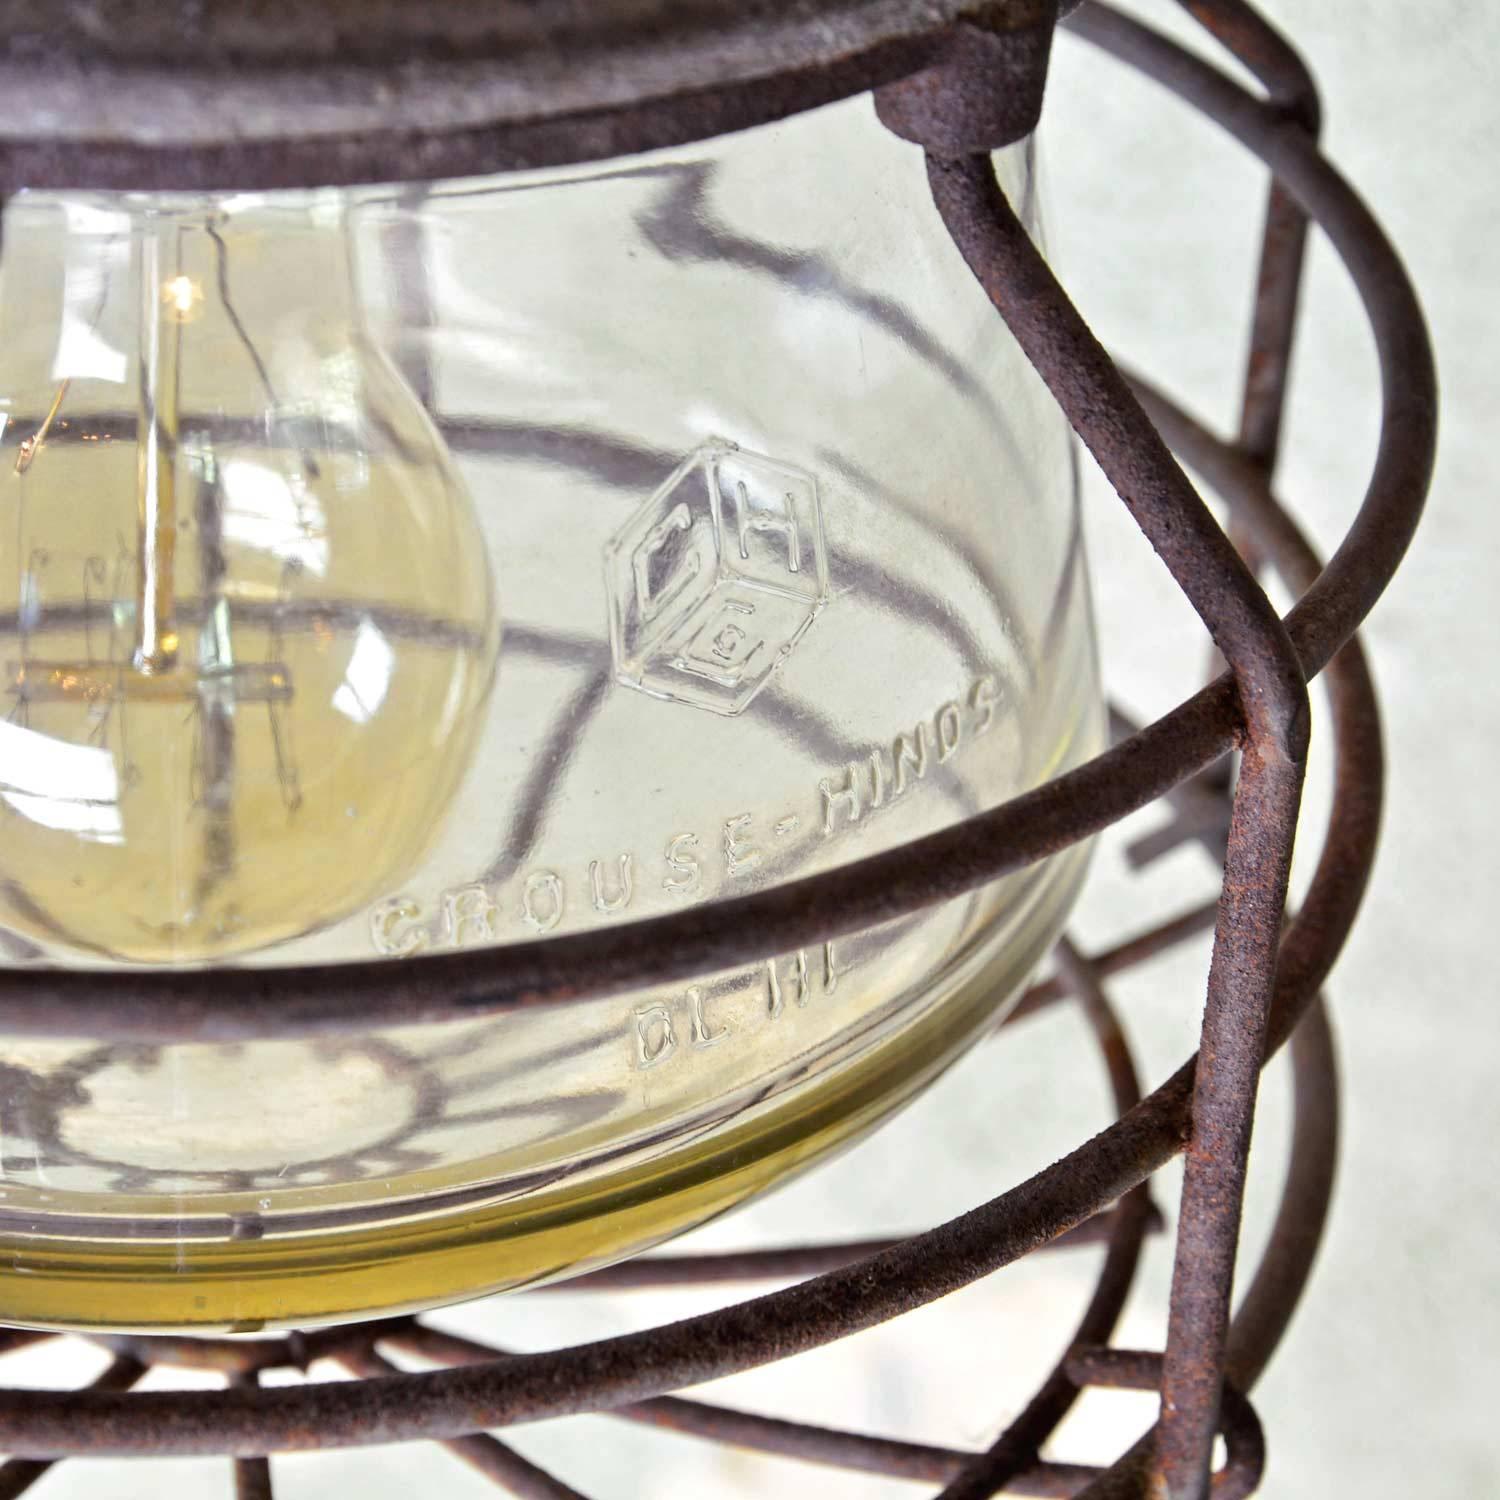 This Industrial pendant by Crouse-Hinds of Syracuse, NY features wonderful thick, original glass, an aluminum body and steel-caged explosion proof glass. Vintage piece from the 1930s with industrial character!

We find that early antique lighting